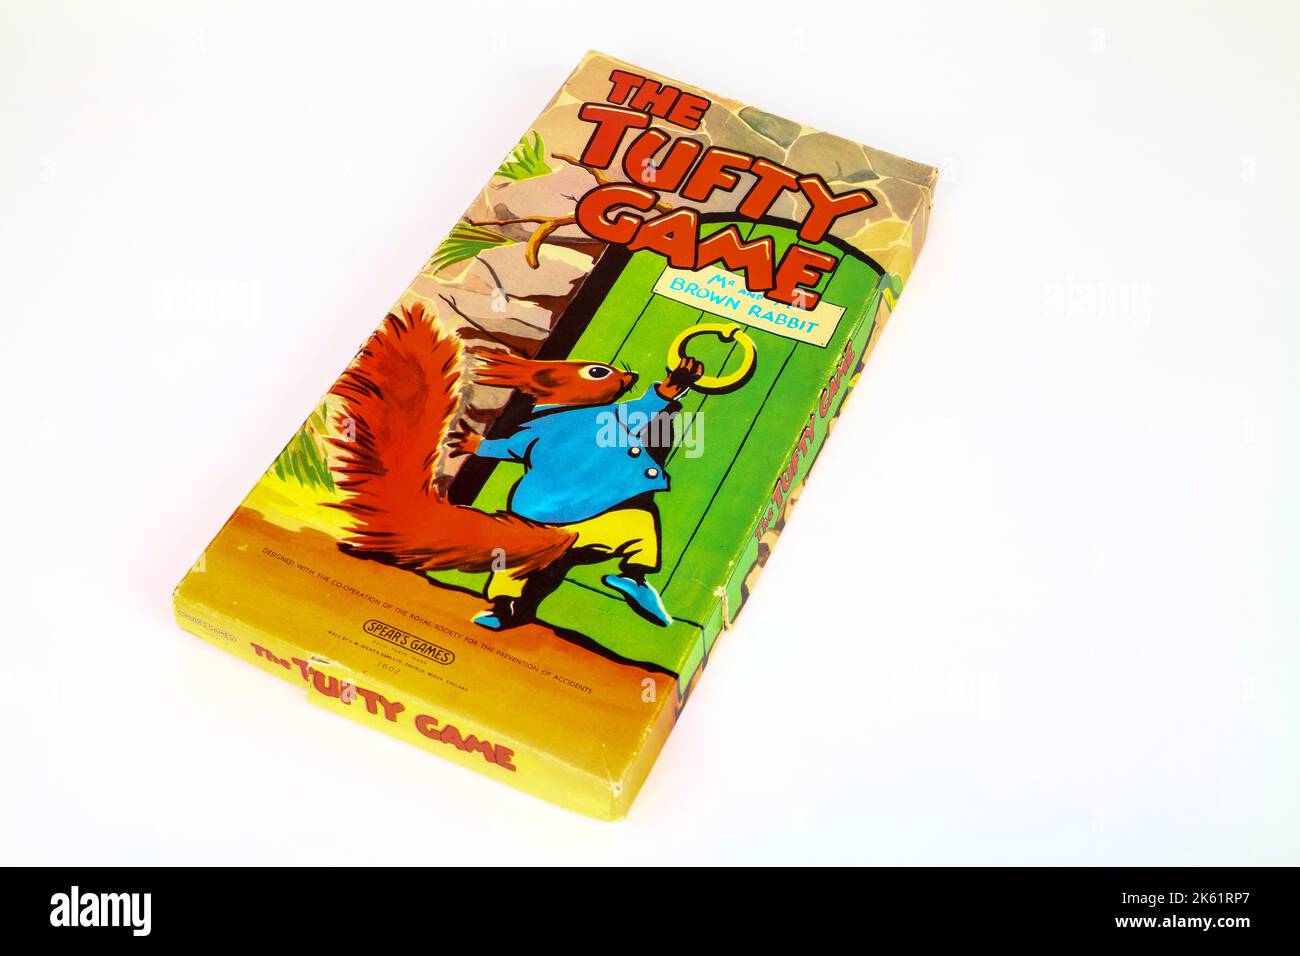 Nostalgic vintage The Tufty Game by Spears Games Stock Photo